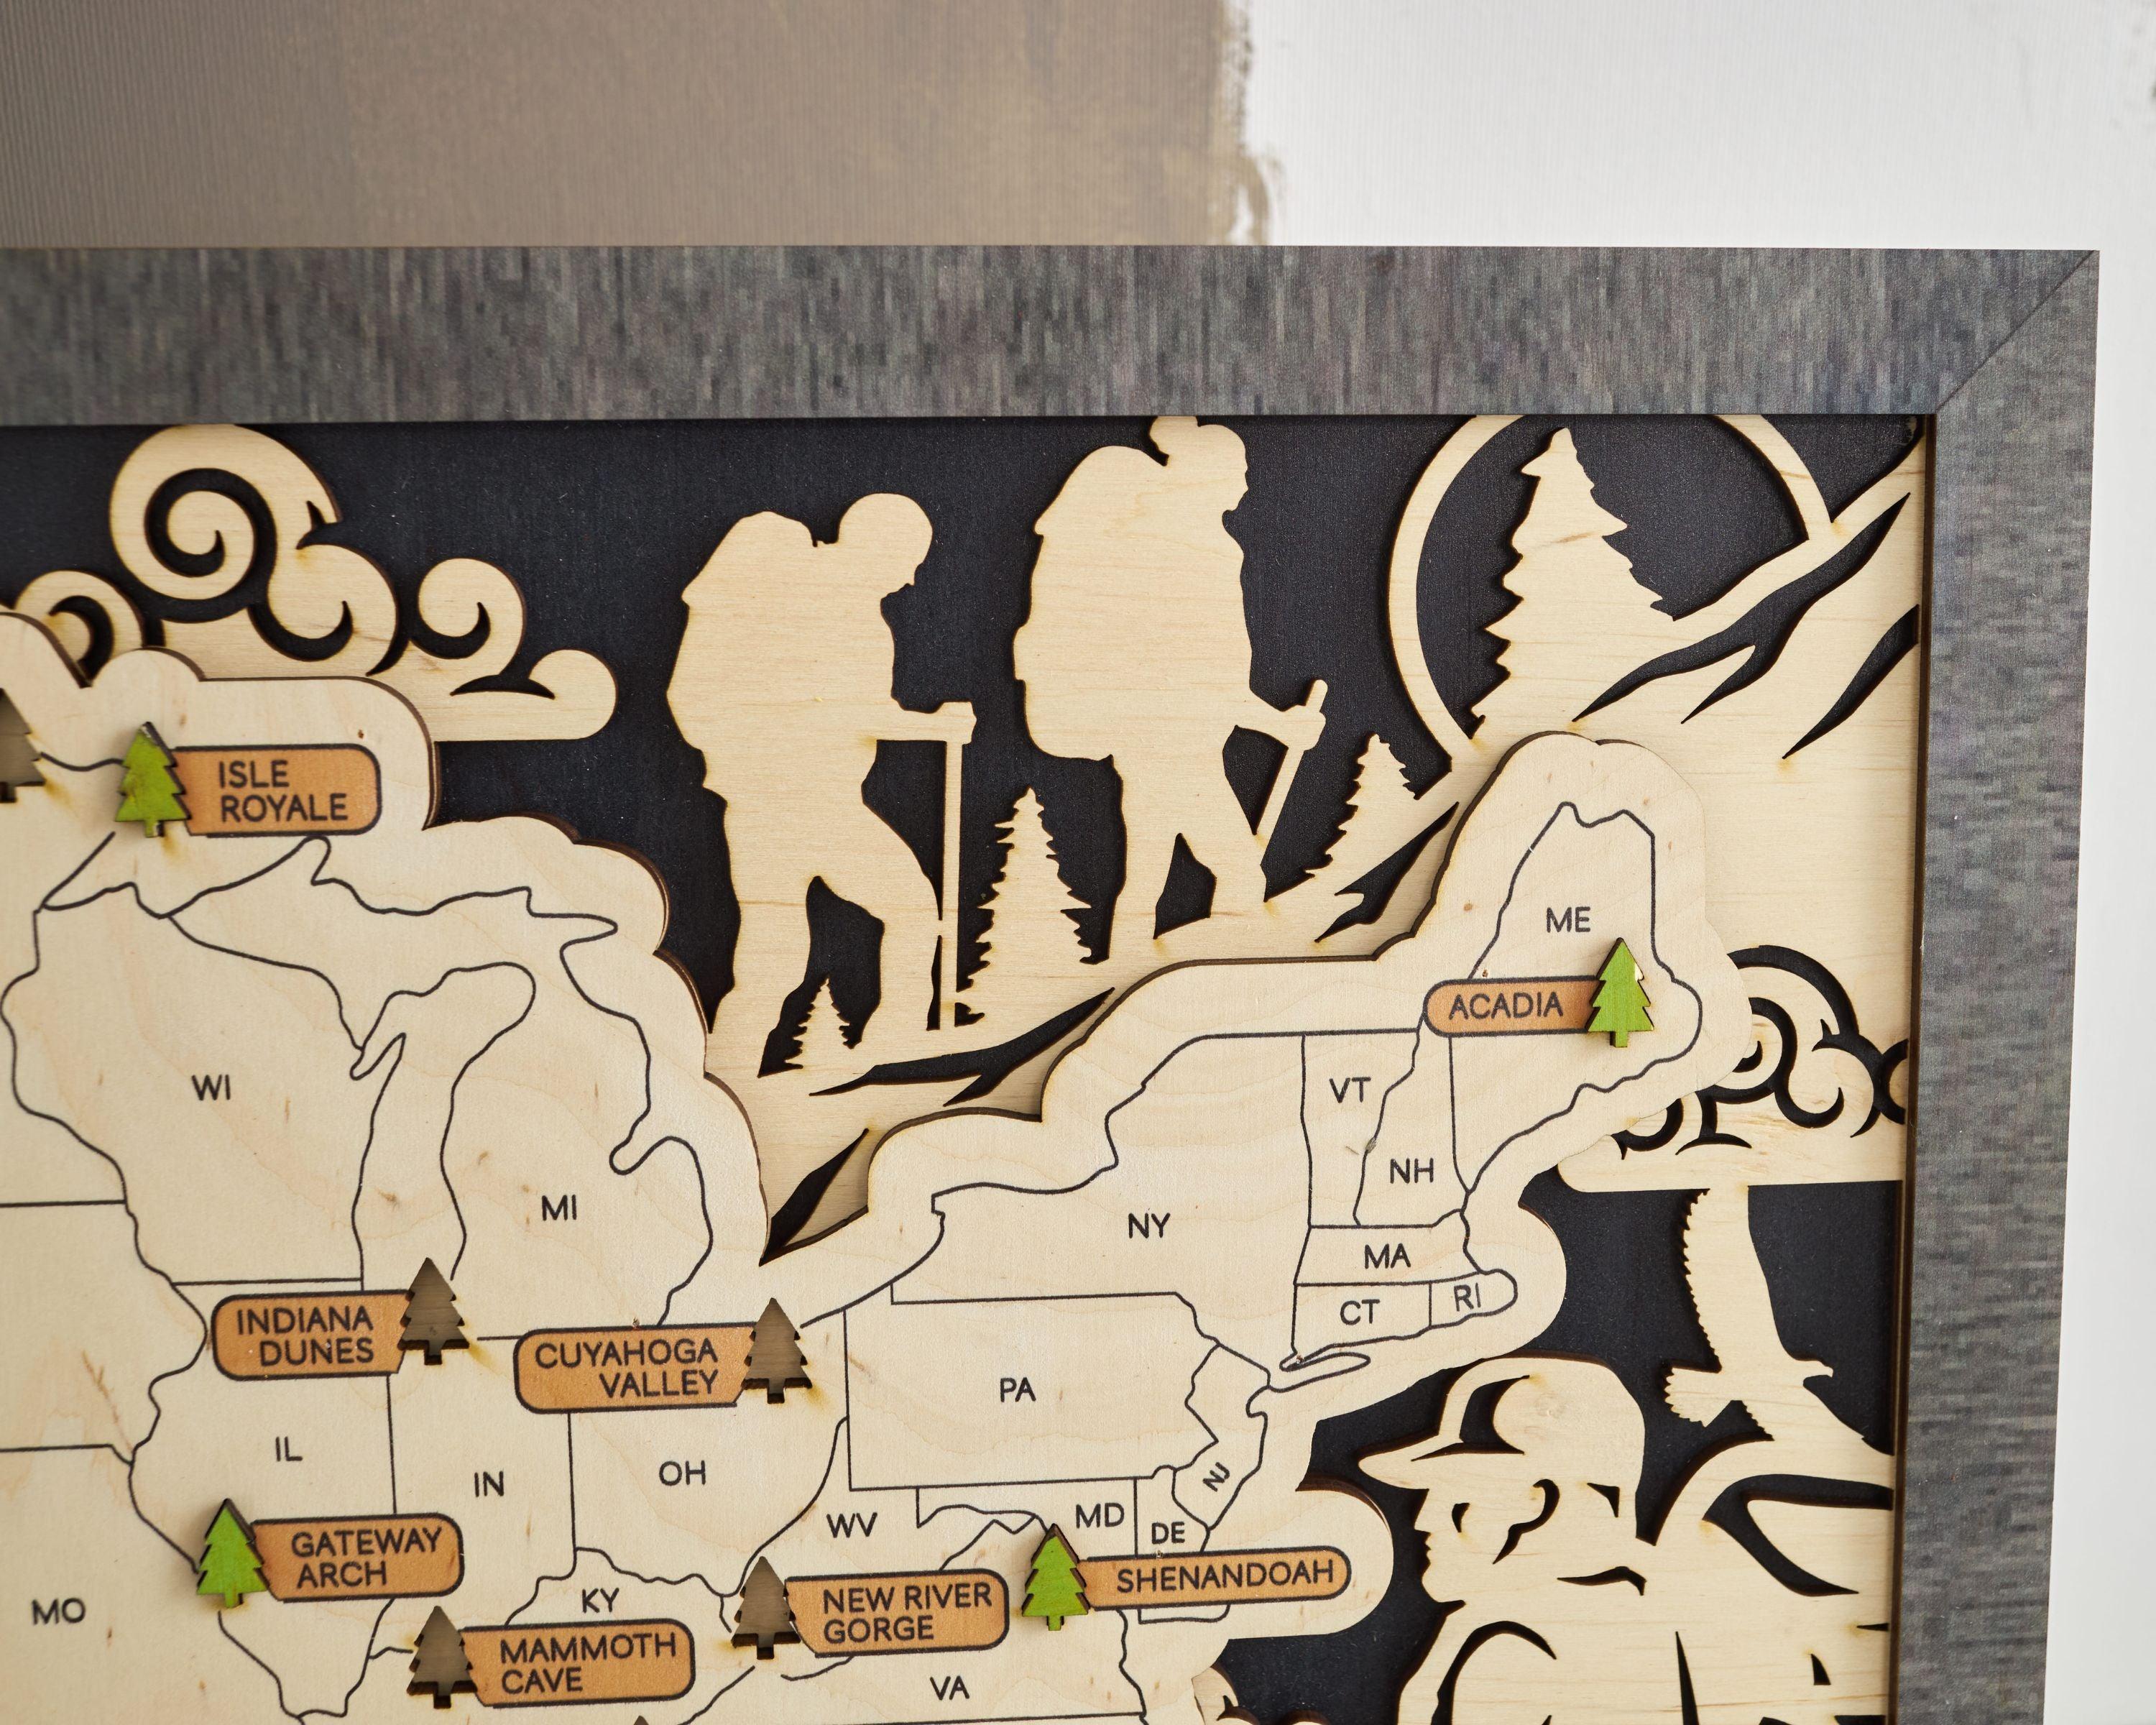 US 3D Wooden National Parks Travel Map With Trees To Record Park Visits (Hiking Design) - Lemap